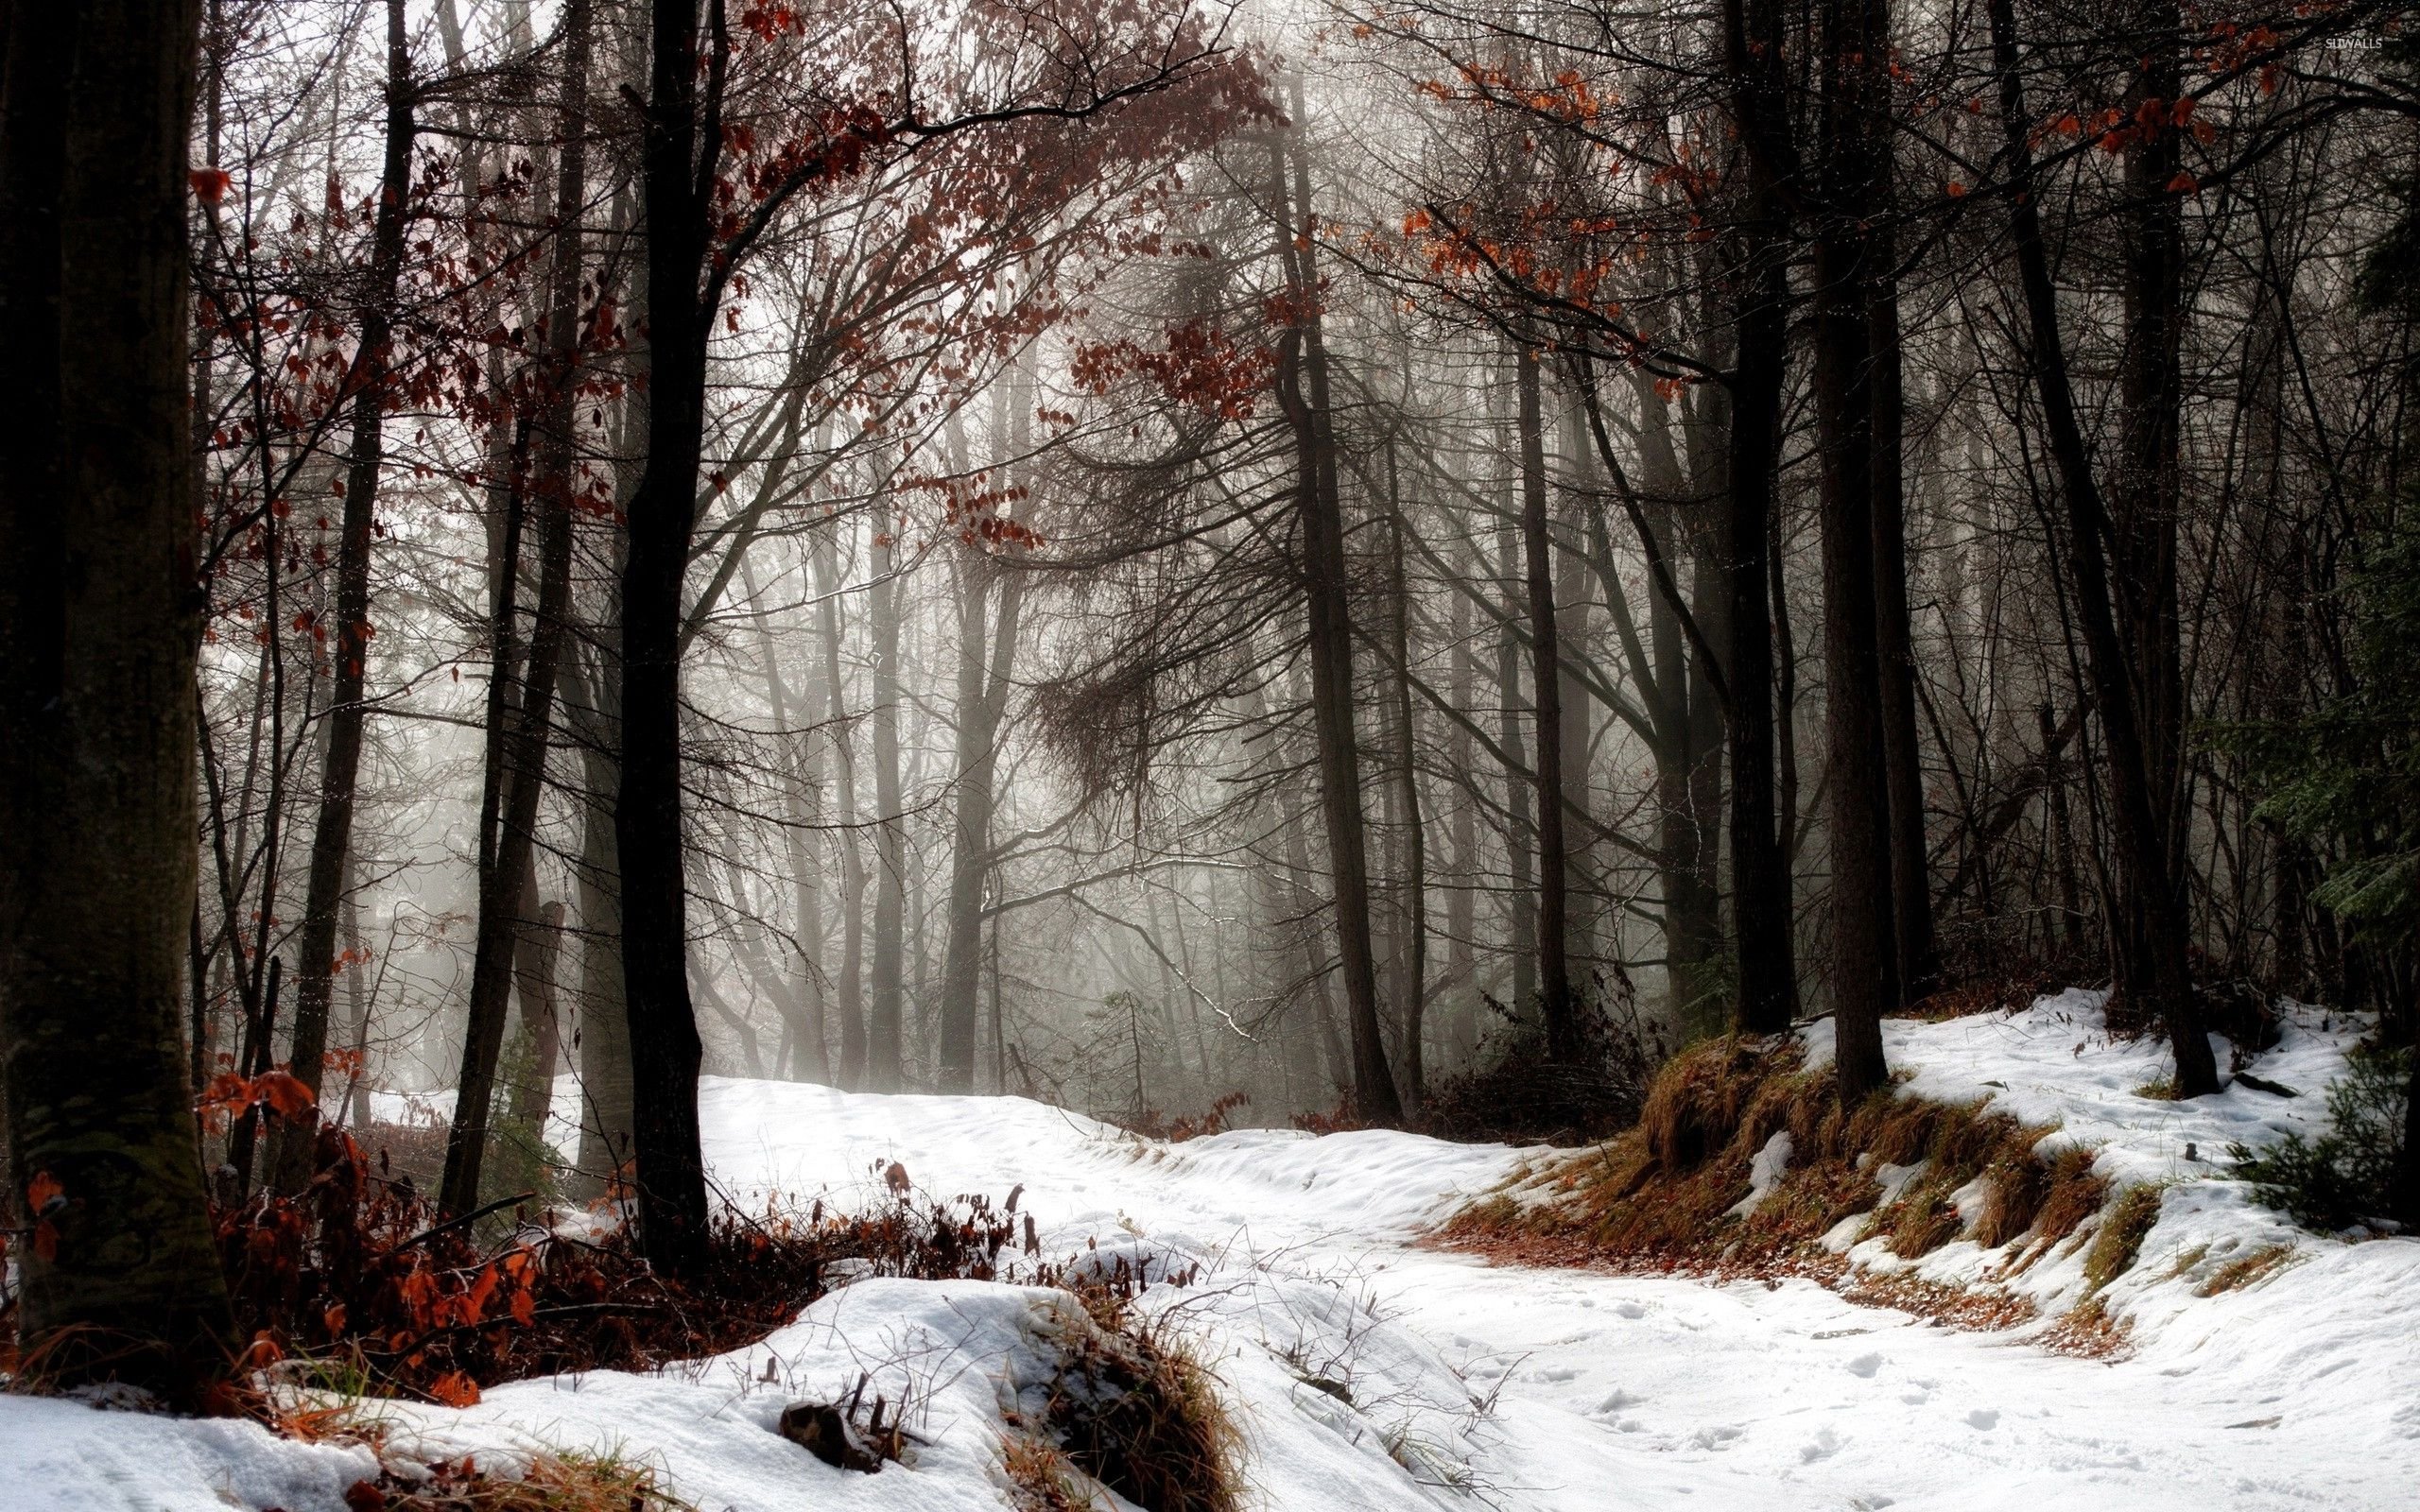 First snow over the autumn forest wallpaper